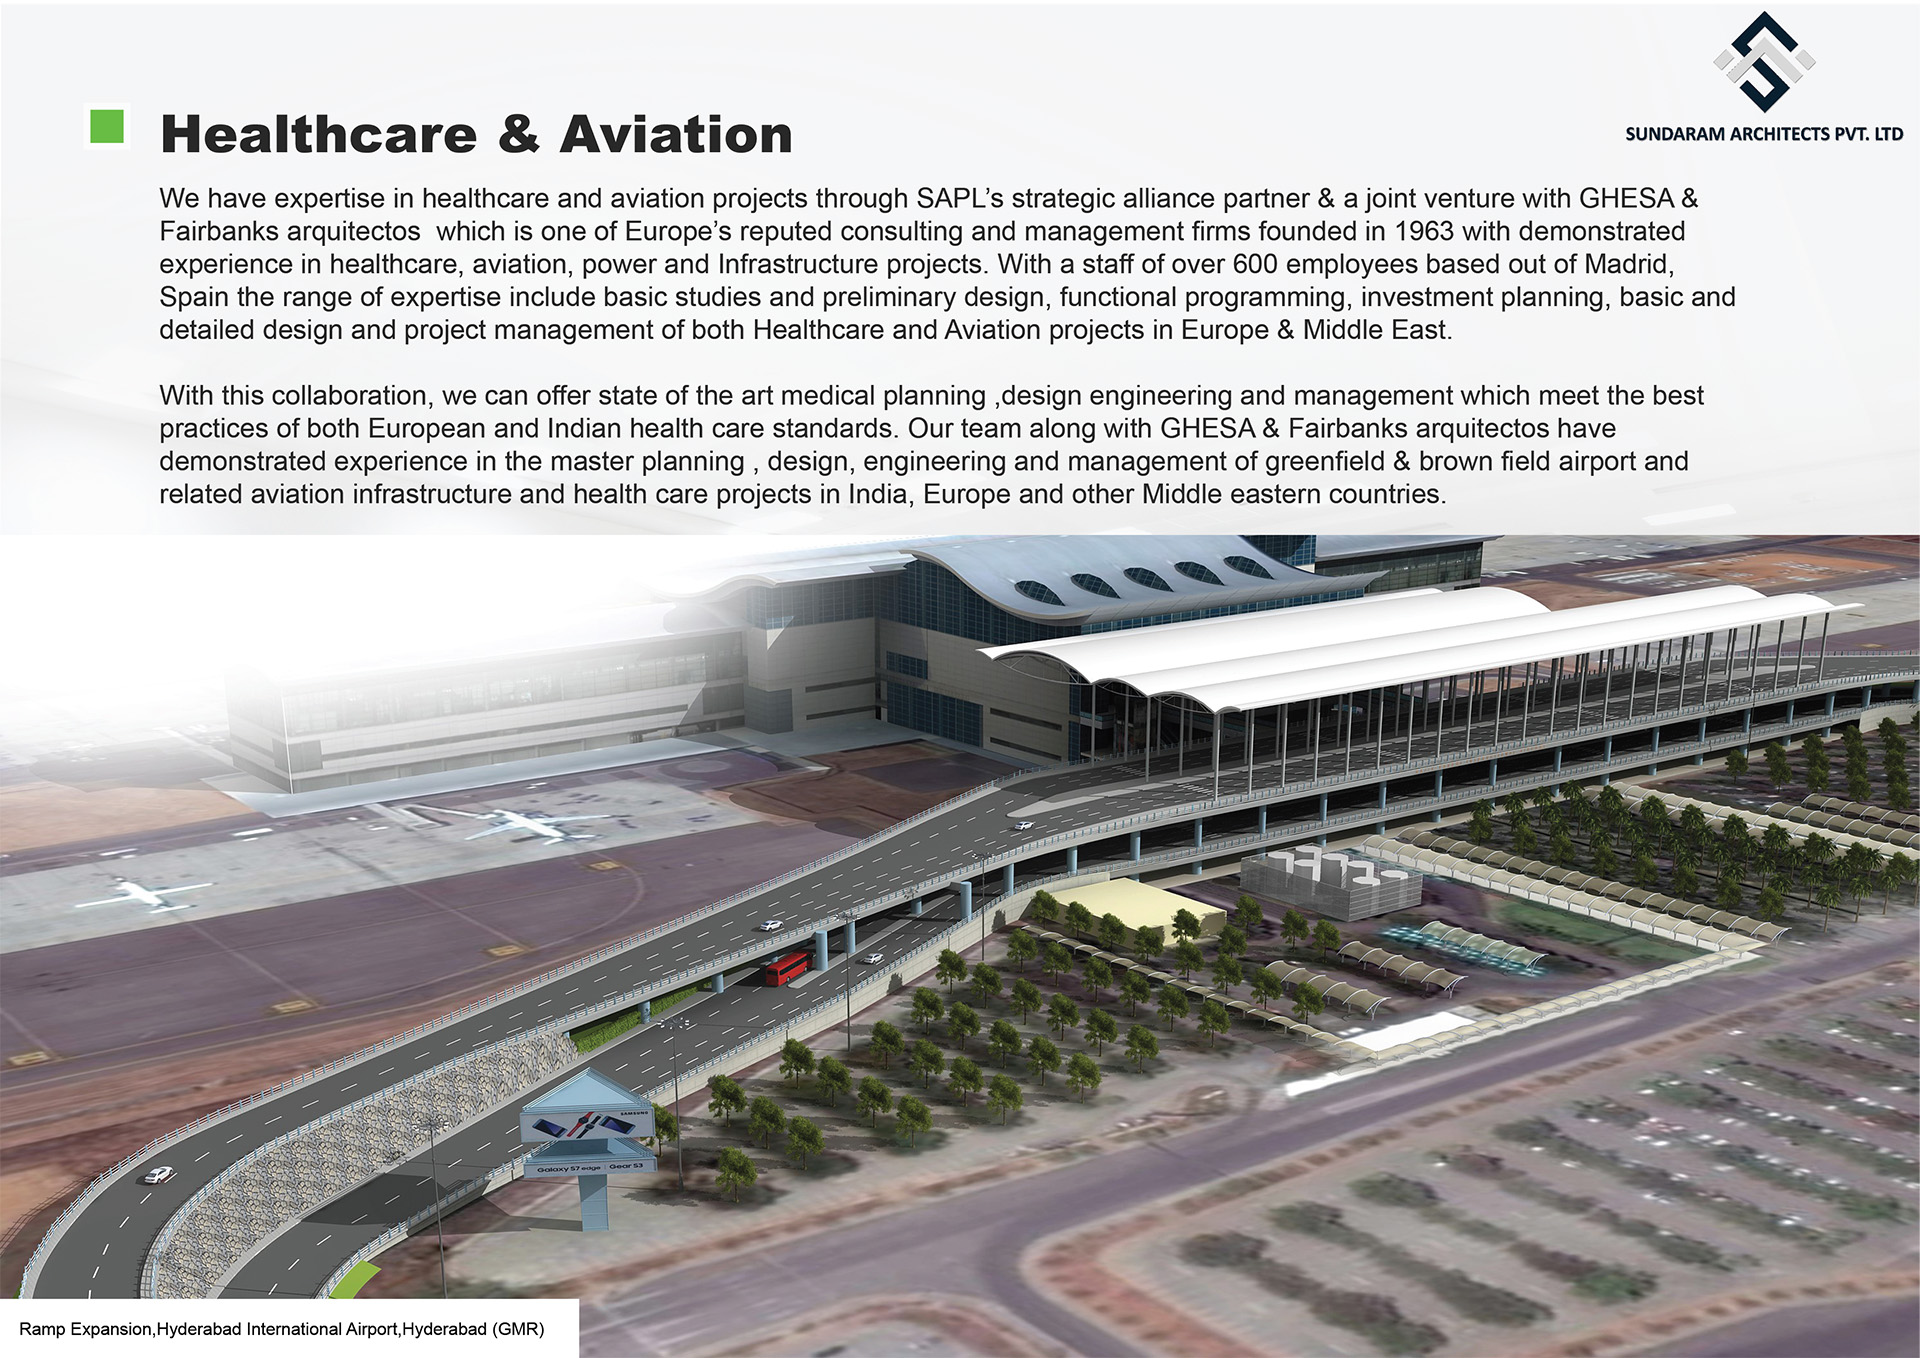 Ramp Expansion, Hyderabad International Airport, Hyderabad - Healthcare& Aviation Design - Technological Edge Architects & Designs